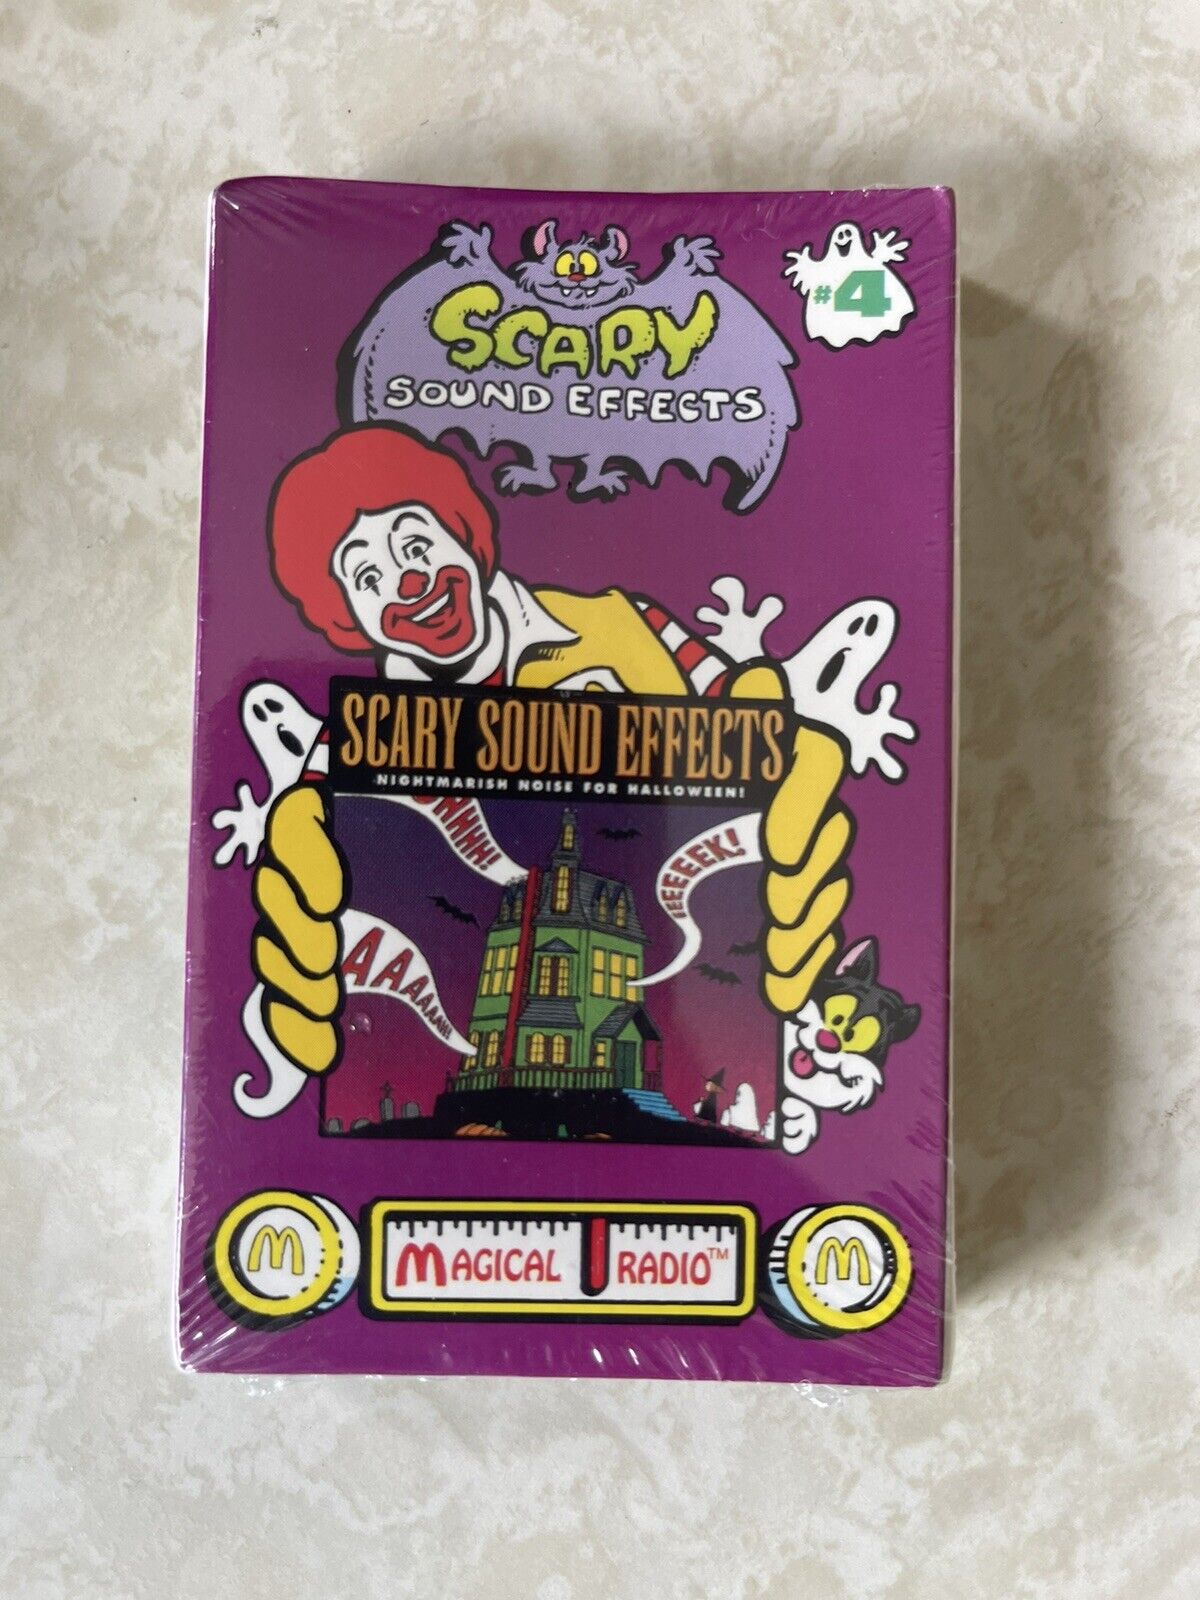 McDonalds Magical Radio Halloween Scary Sound Effects #4 Vintage Cassette Tape